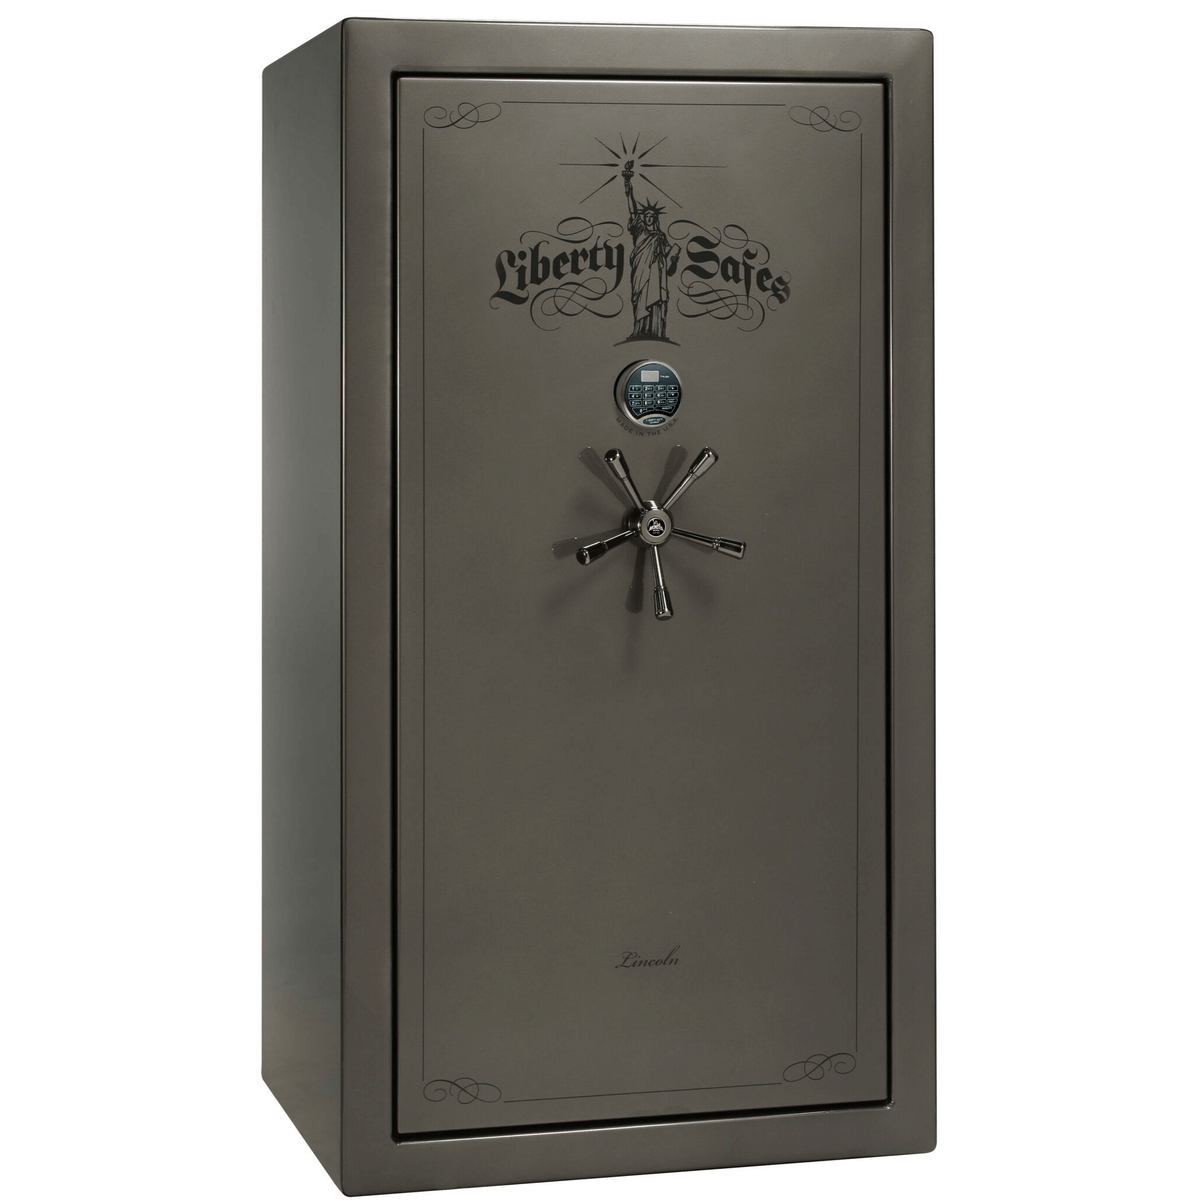 Liberty Lincoln 40 Safe in Gray Gloss with Black Chrome Electronic Lock.